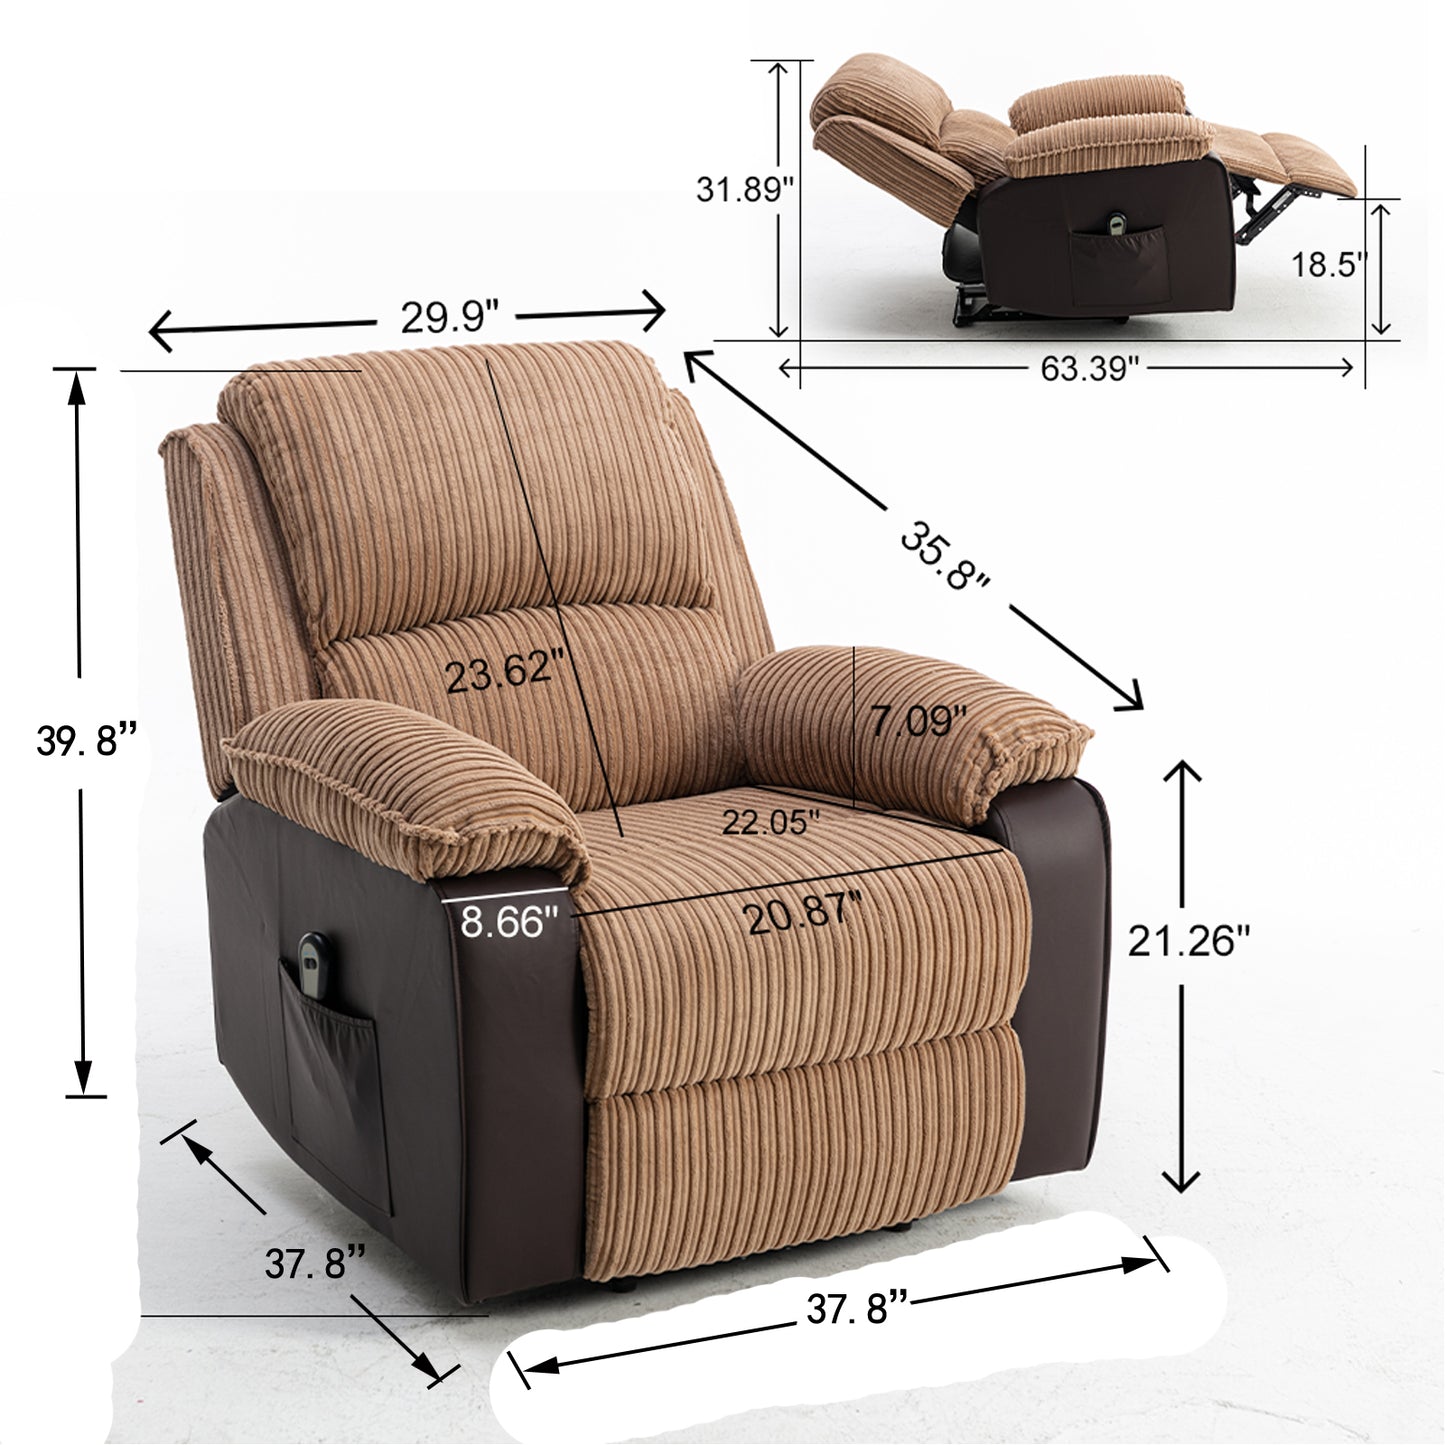 LuxeLounge Electric Recliner: Plush Comfort with Smart Control